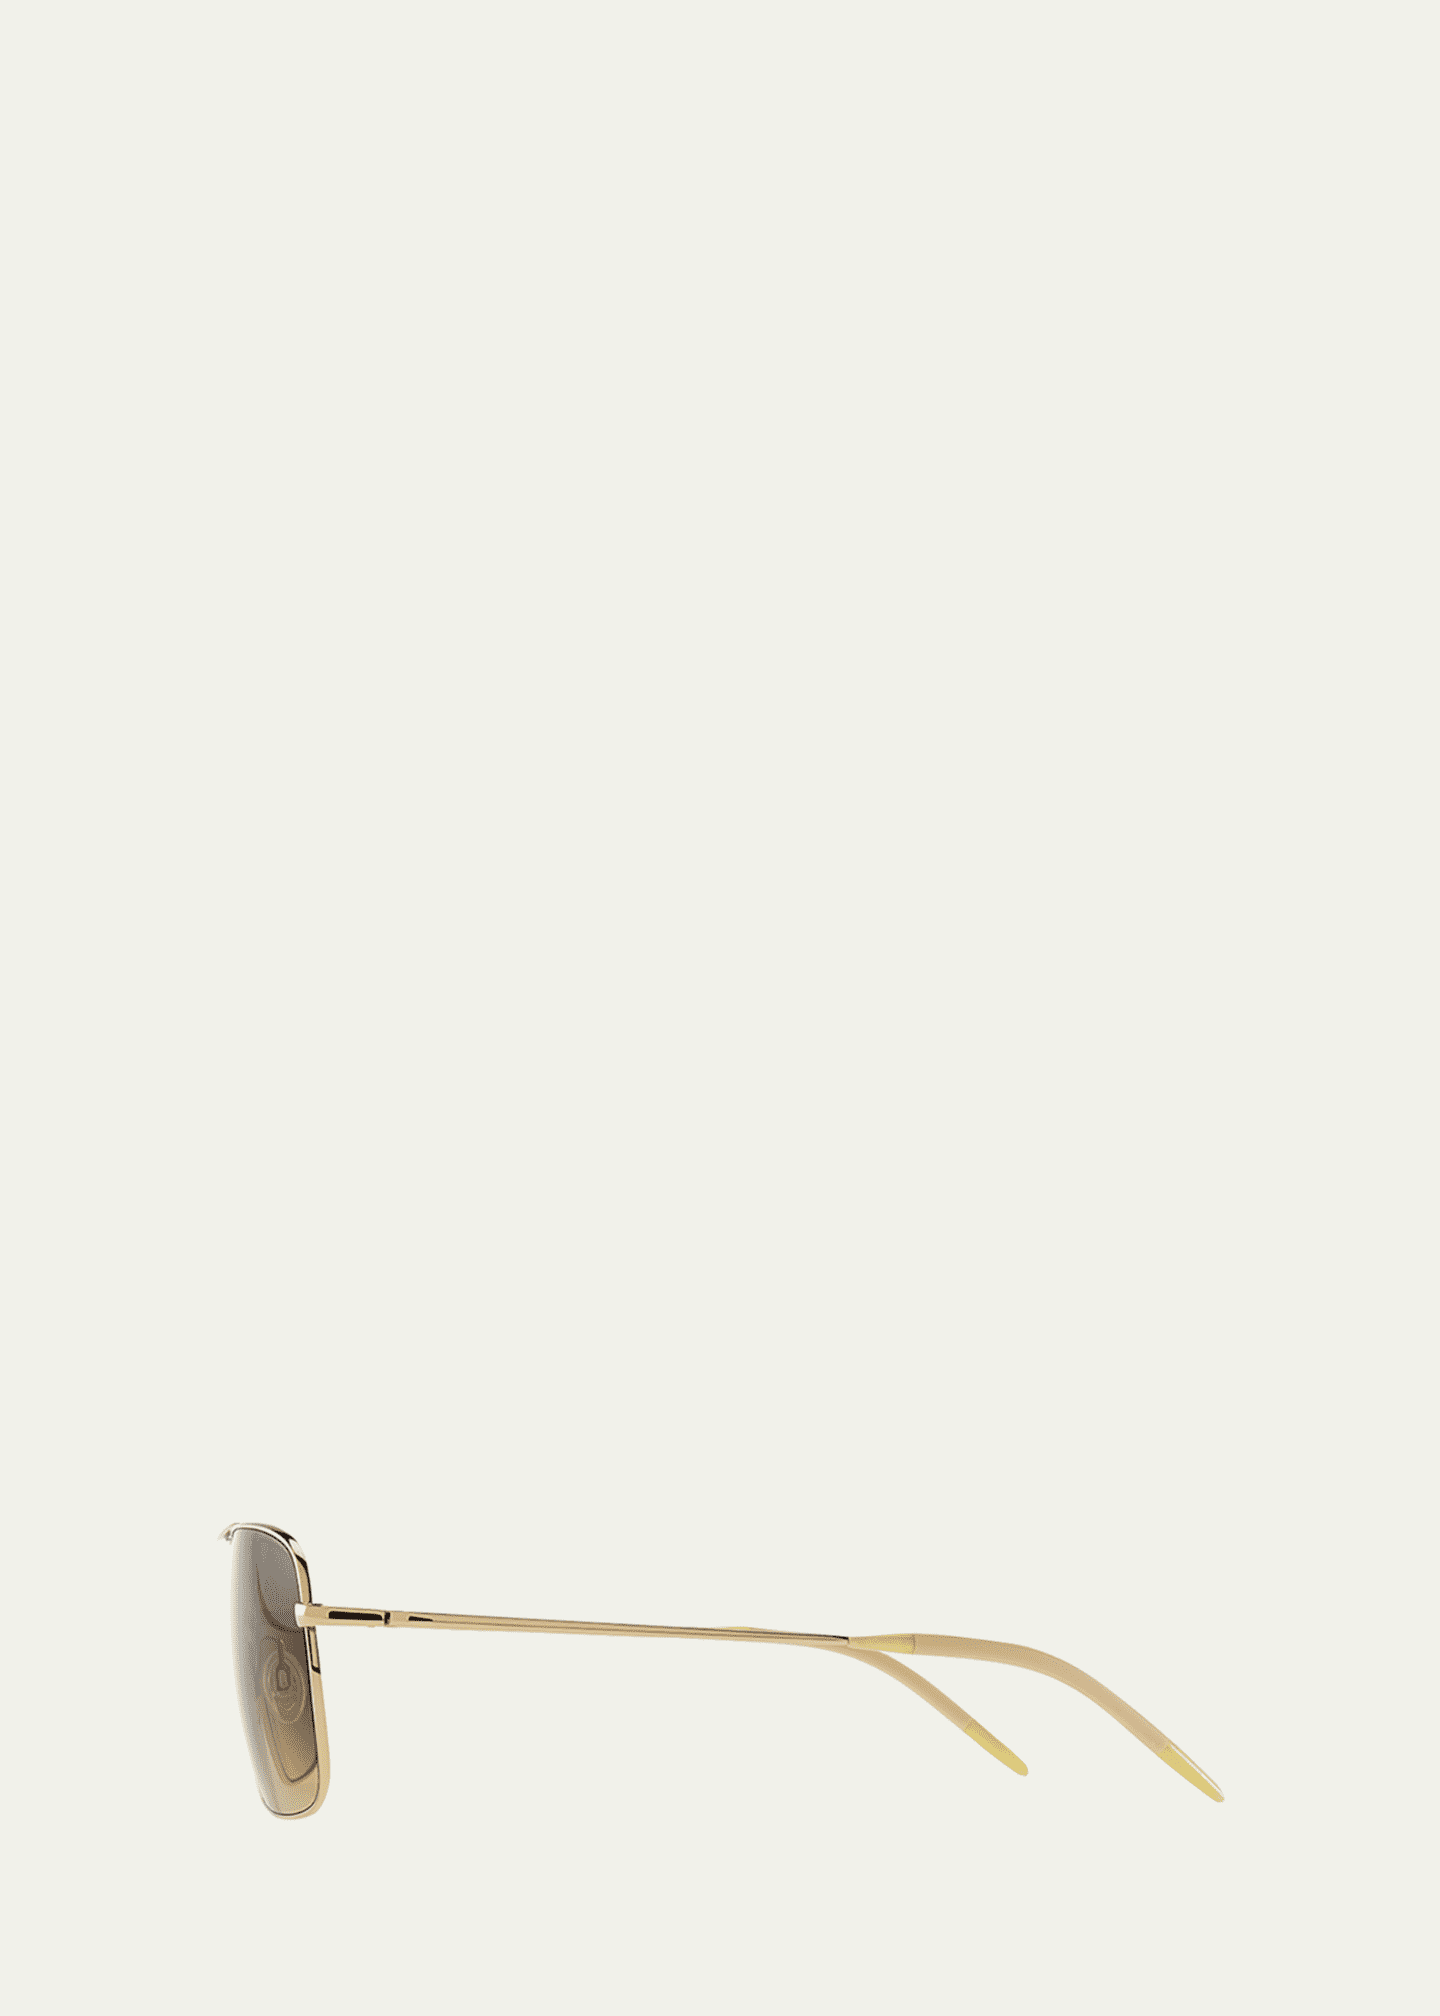 Oliver Peoples Clifton Photochromic Sunglasses, Gold - Bergdorf Goodman